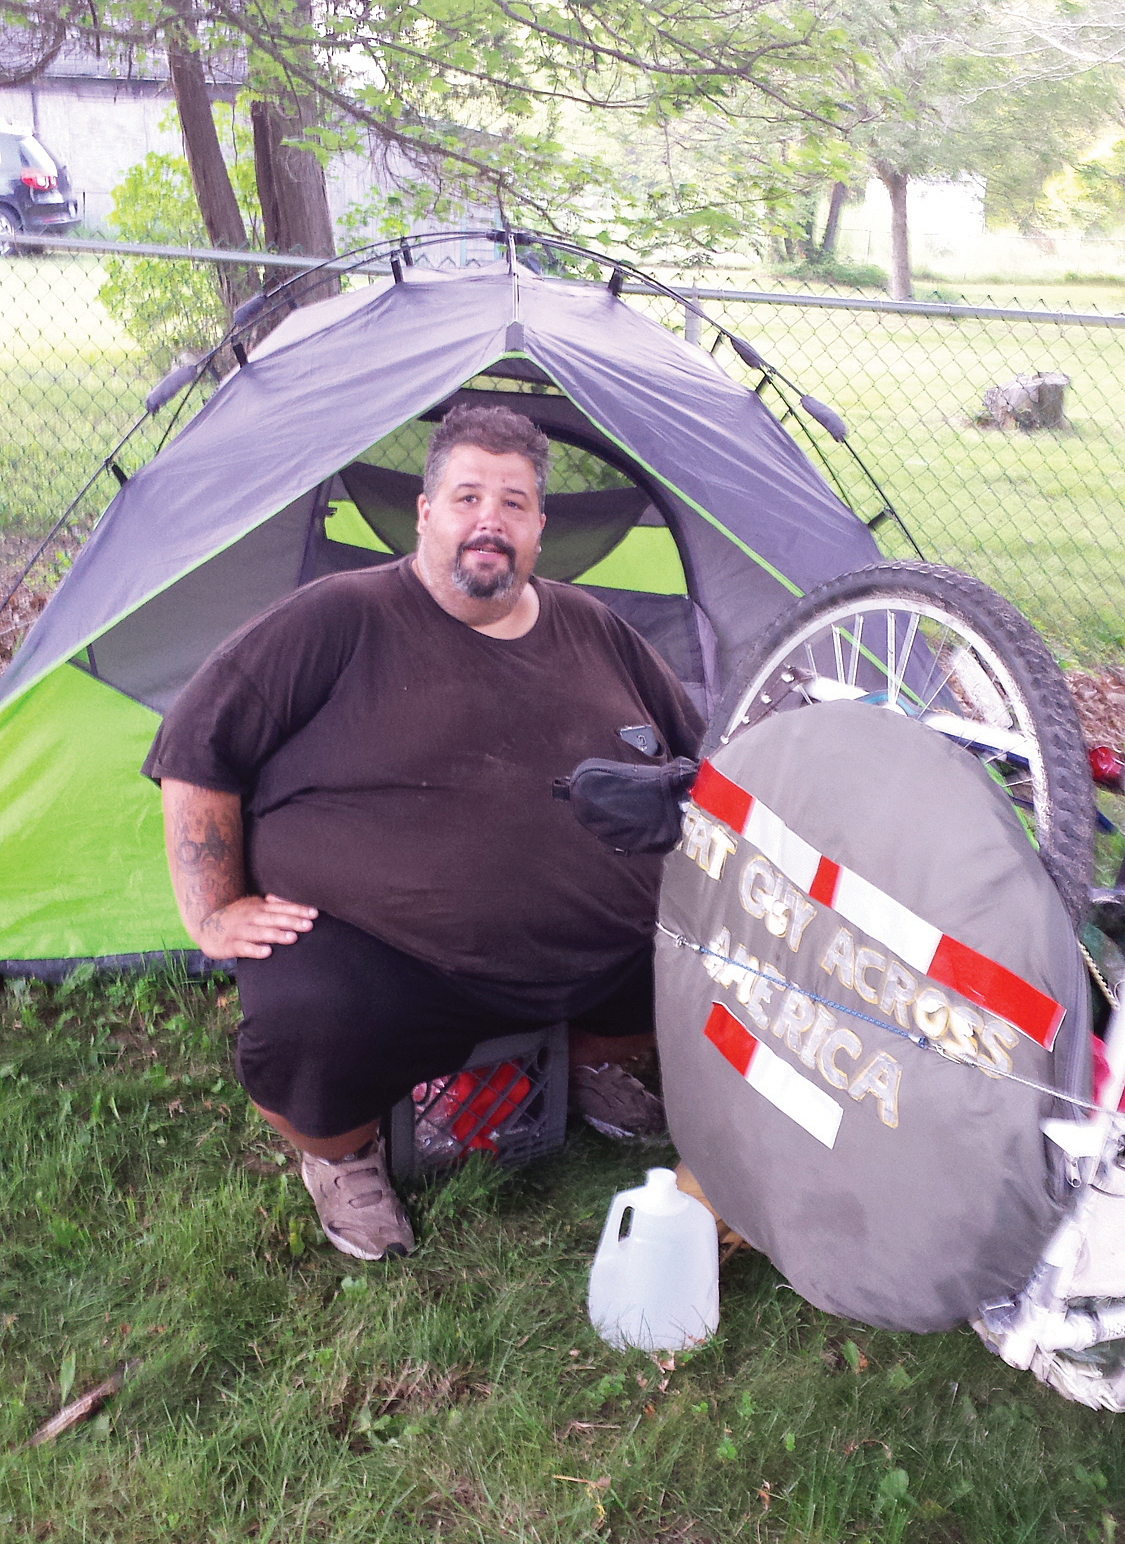 Eric Hites, rests at the Bliss Congregational Church in Tiverton, R.I on July 21, 2015, while he waits for a new bicycle so he can continue his cross-country ride. The about 560-pound man is biking across the United States to lose weight.